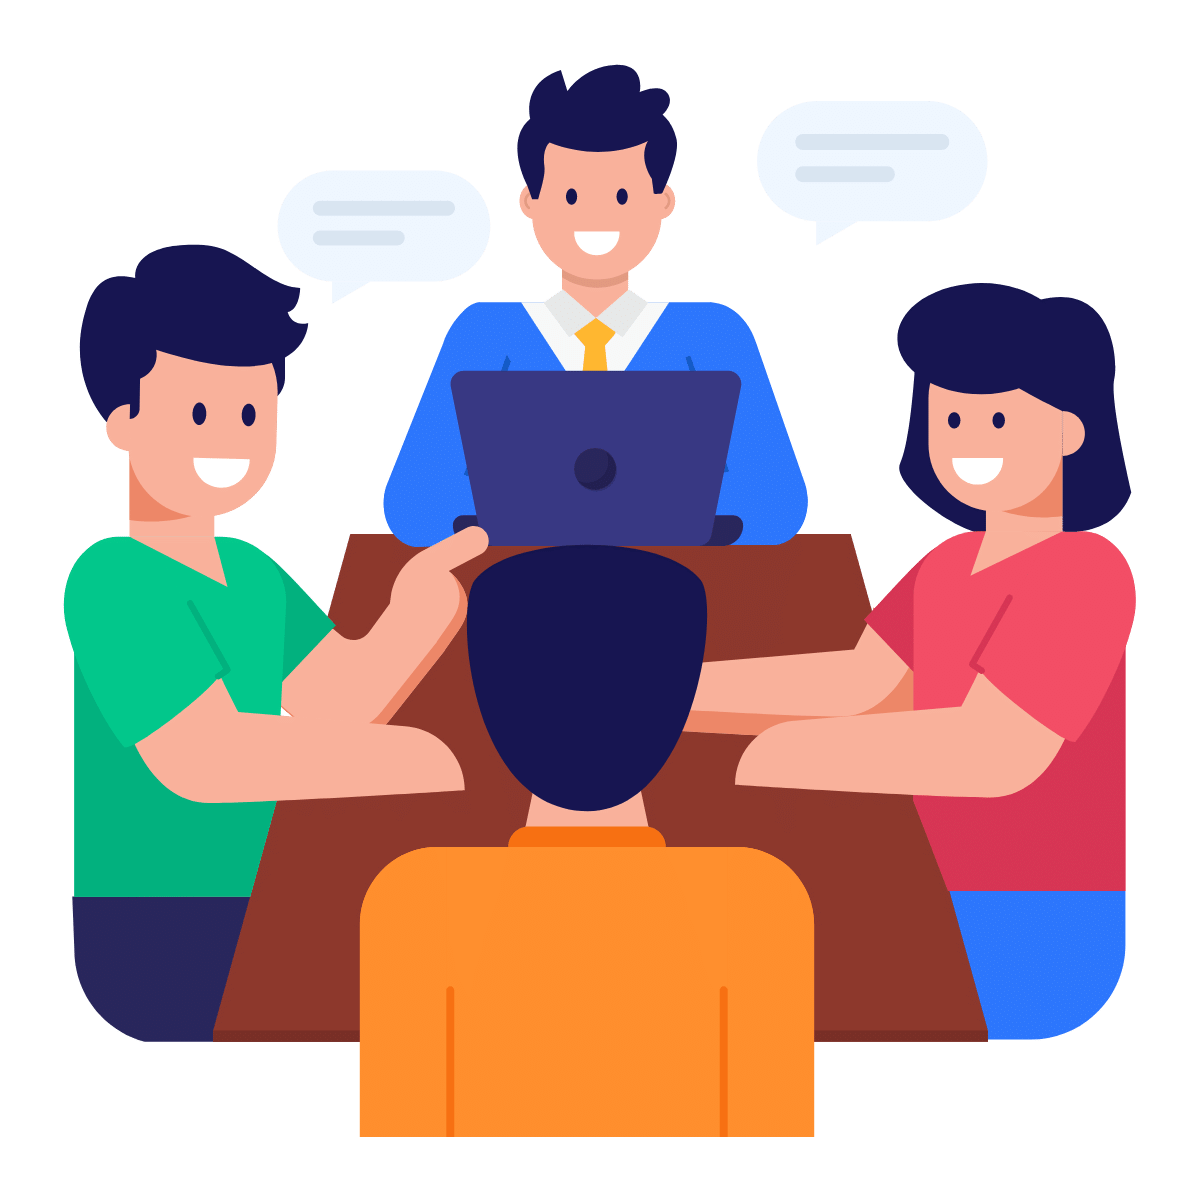 Illustrated image of four people sat around a table working collaboratively